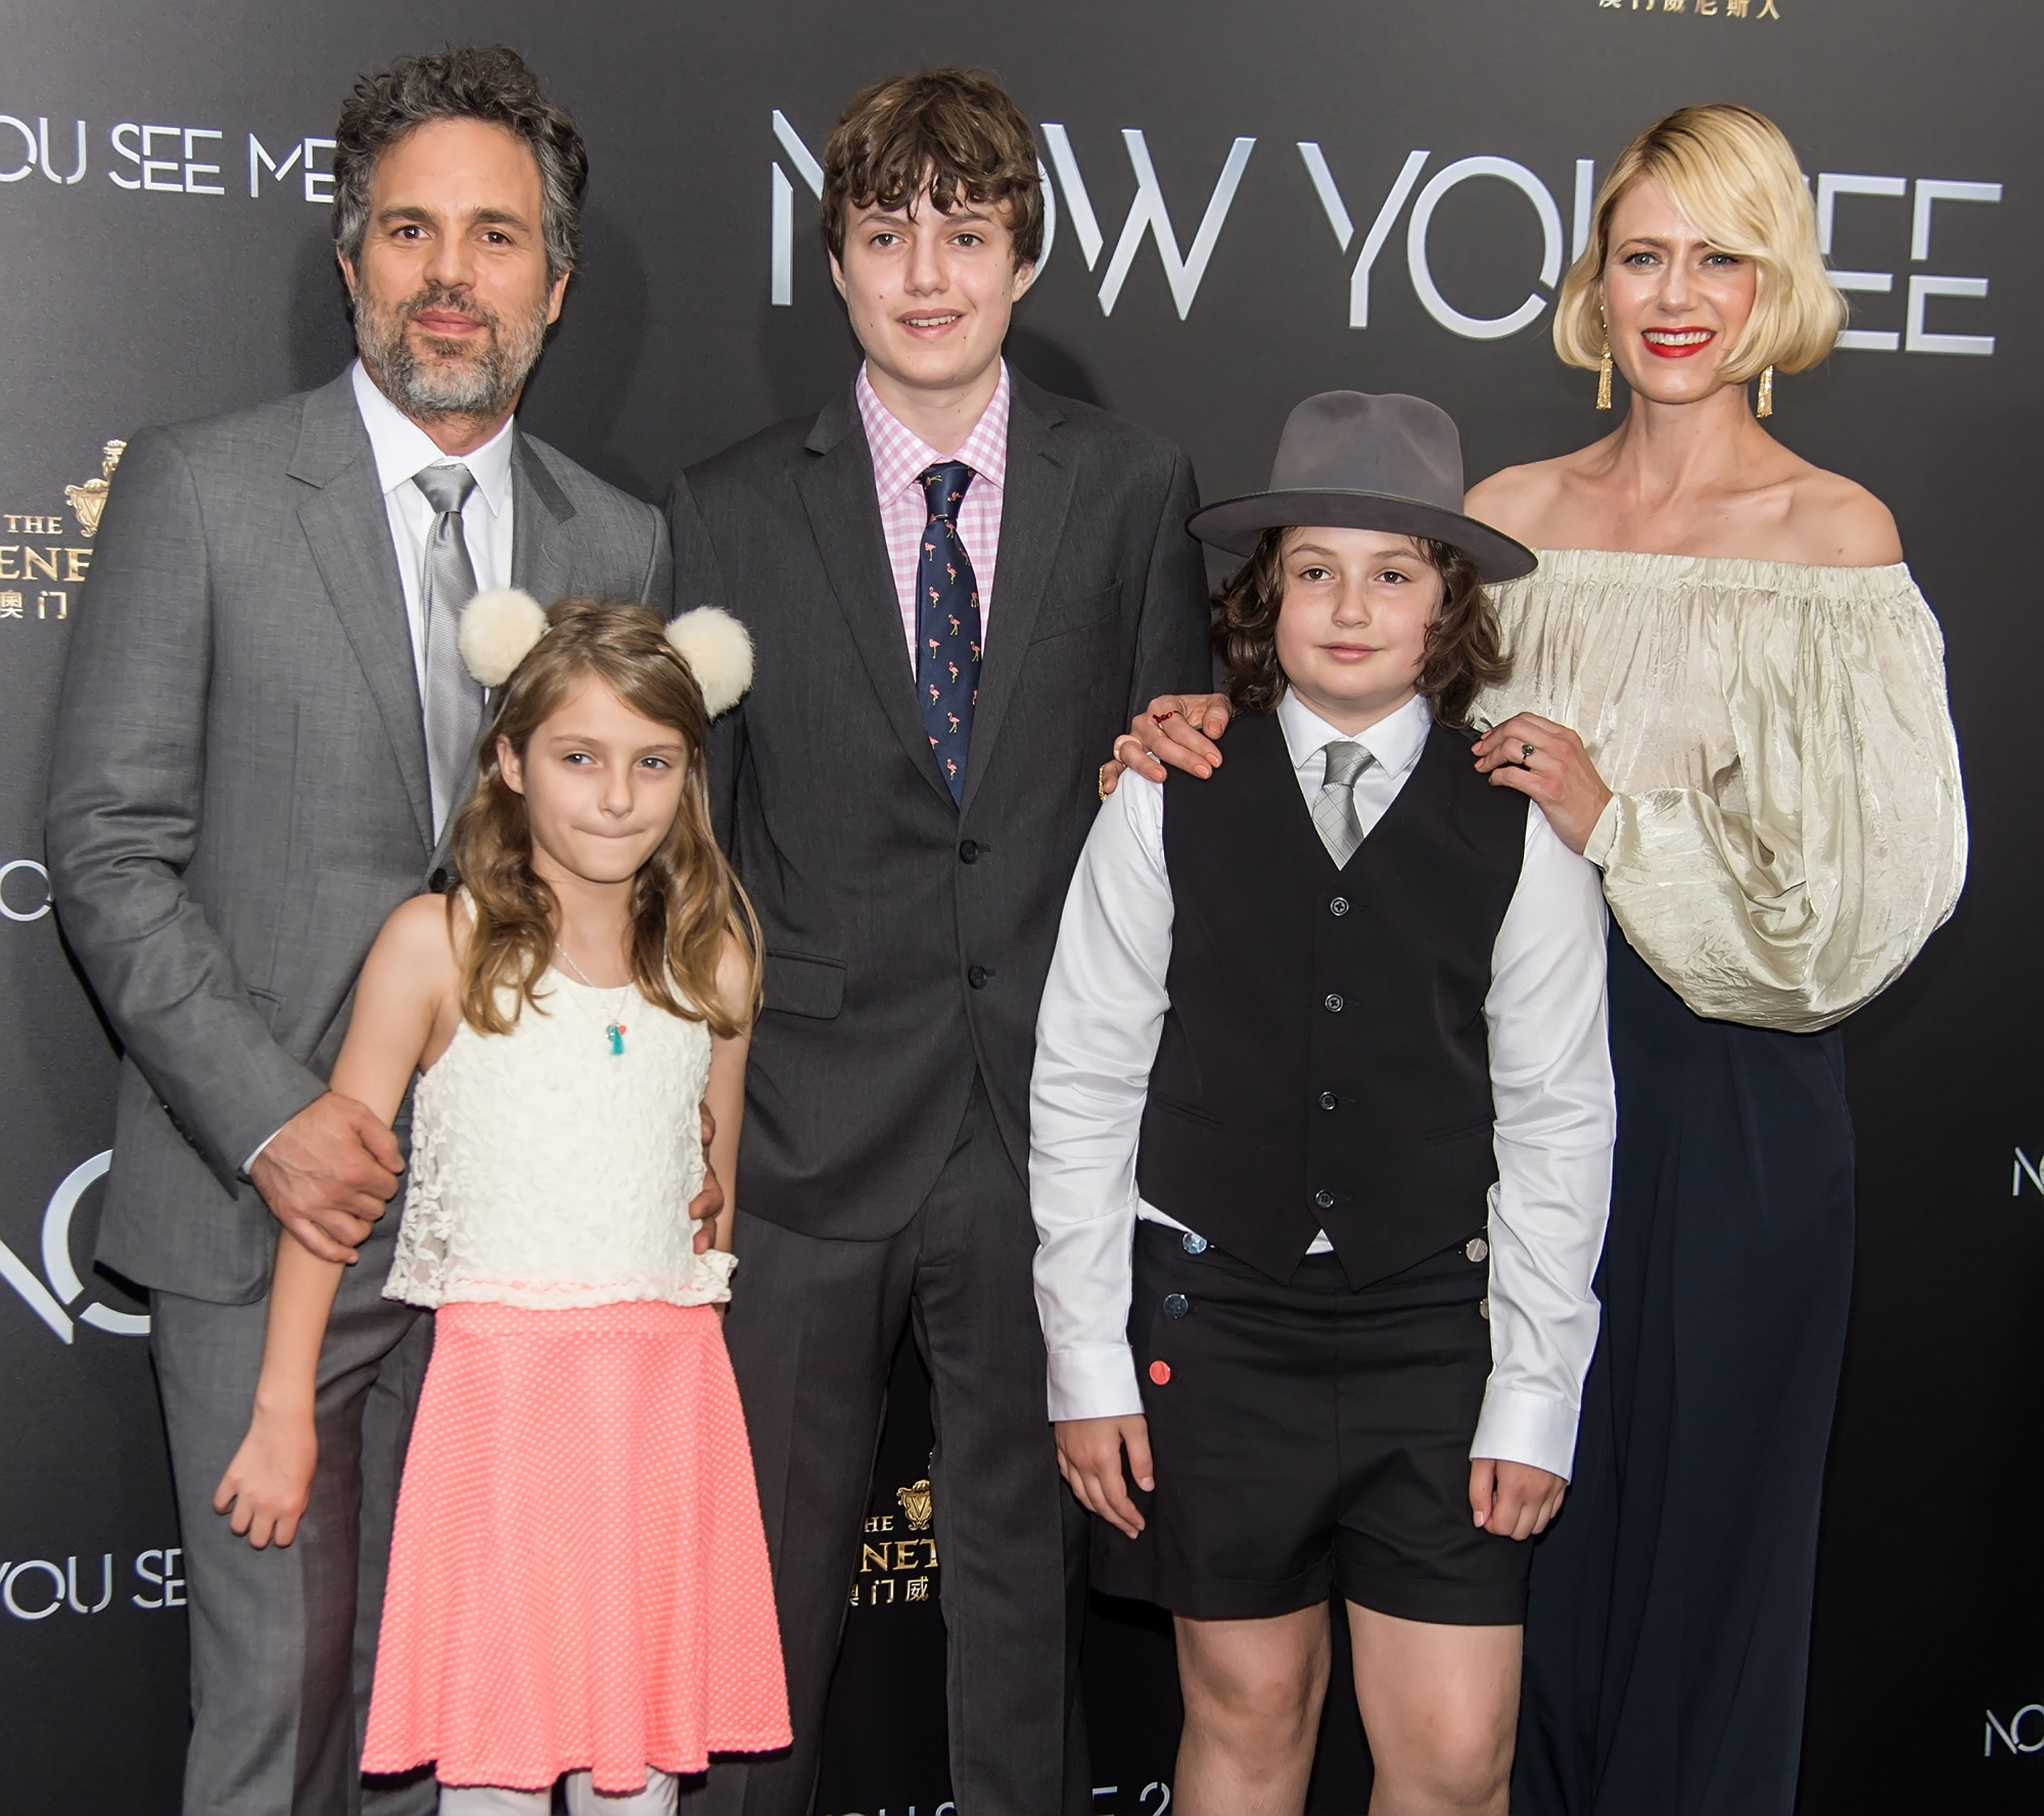 Mark, Odette, Keen, Bella Noche, and Sunrise Ruffalo at the premiere of "Now You See Me 2" in New York City on June 6, 2016 | Source: Getty Images